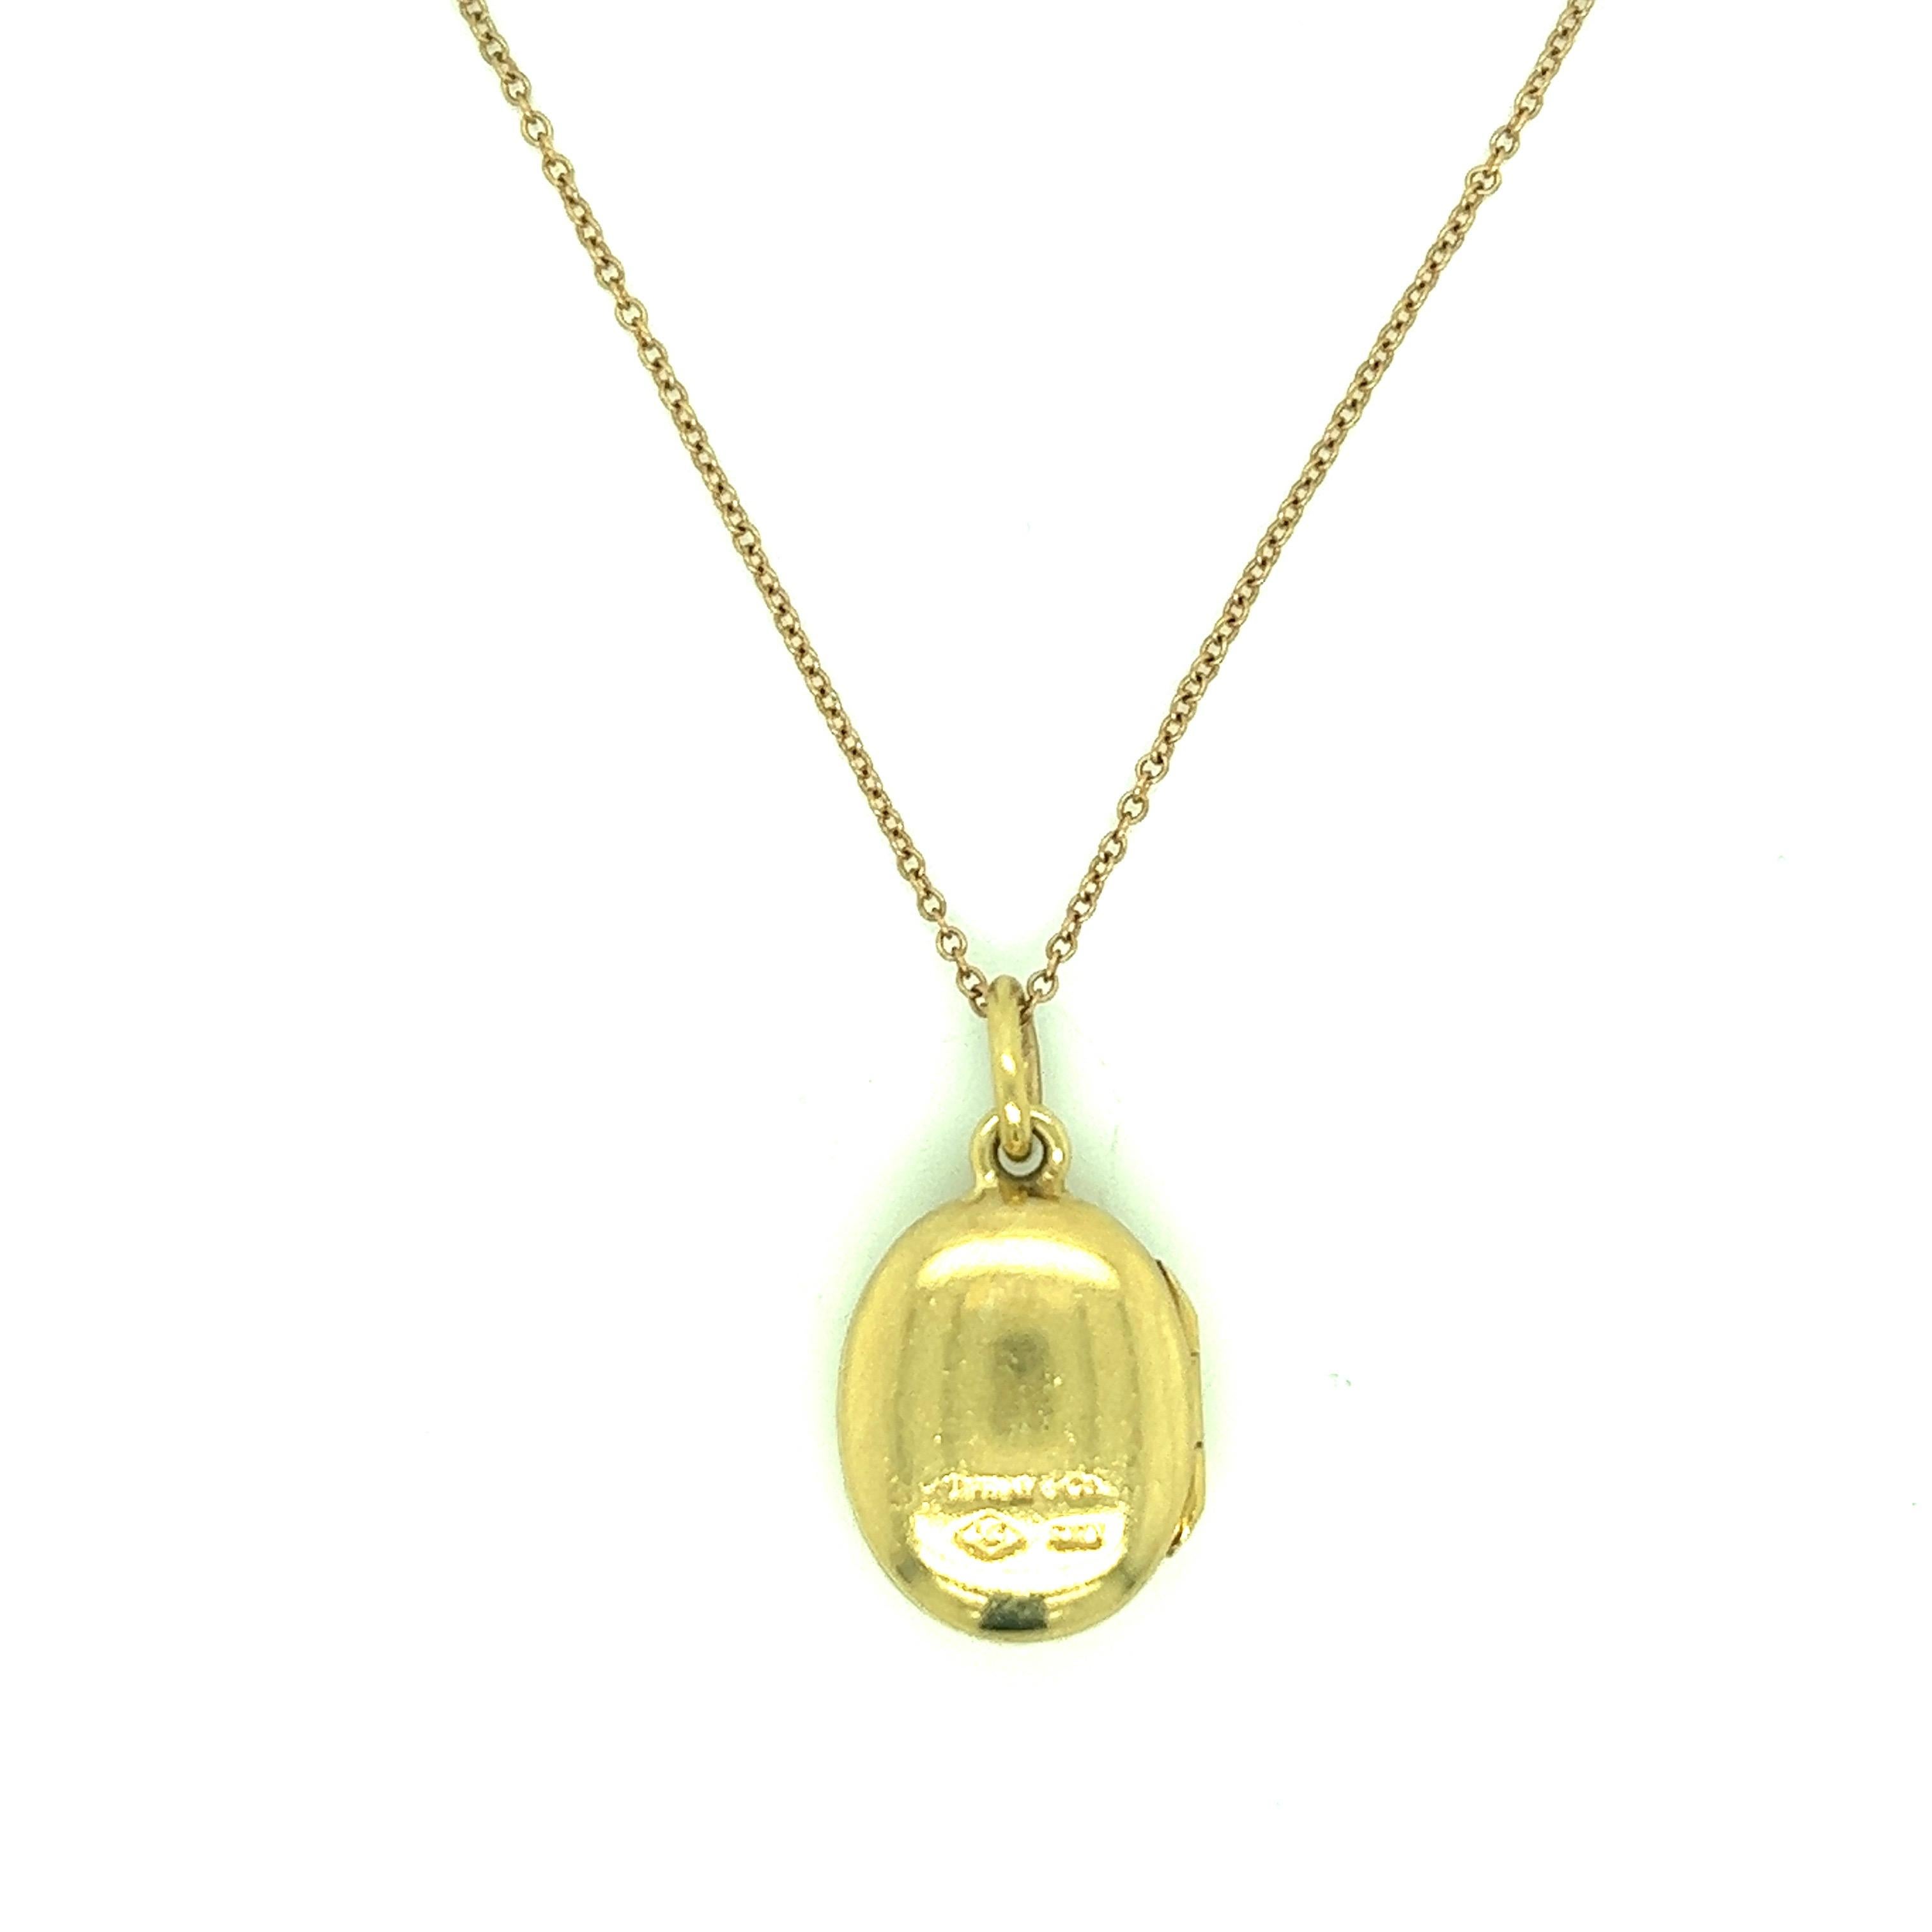 Tiffany & Co. 18 karat yellow gold locket pendant with chain necklace. Made in Italy. Marked: Tiffany & Co. / Italy / Au750. Total weight: 5.8 grams. Chain length: 7.75 inches. Pendant measurements: width 1.3 cm, length 1.9 cm. 